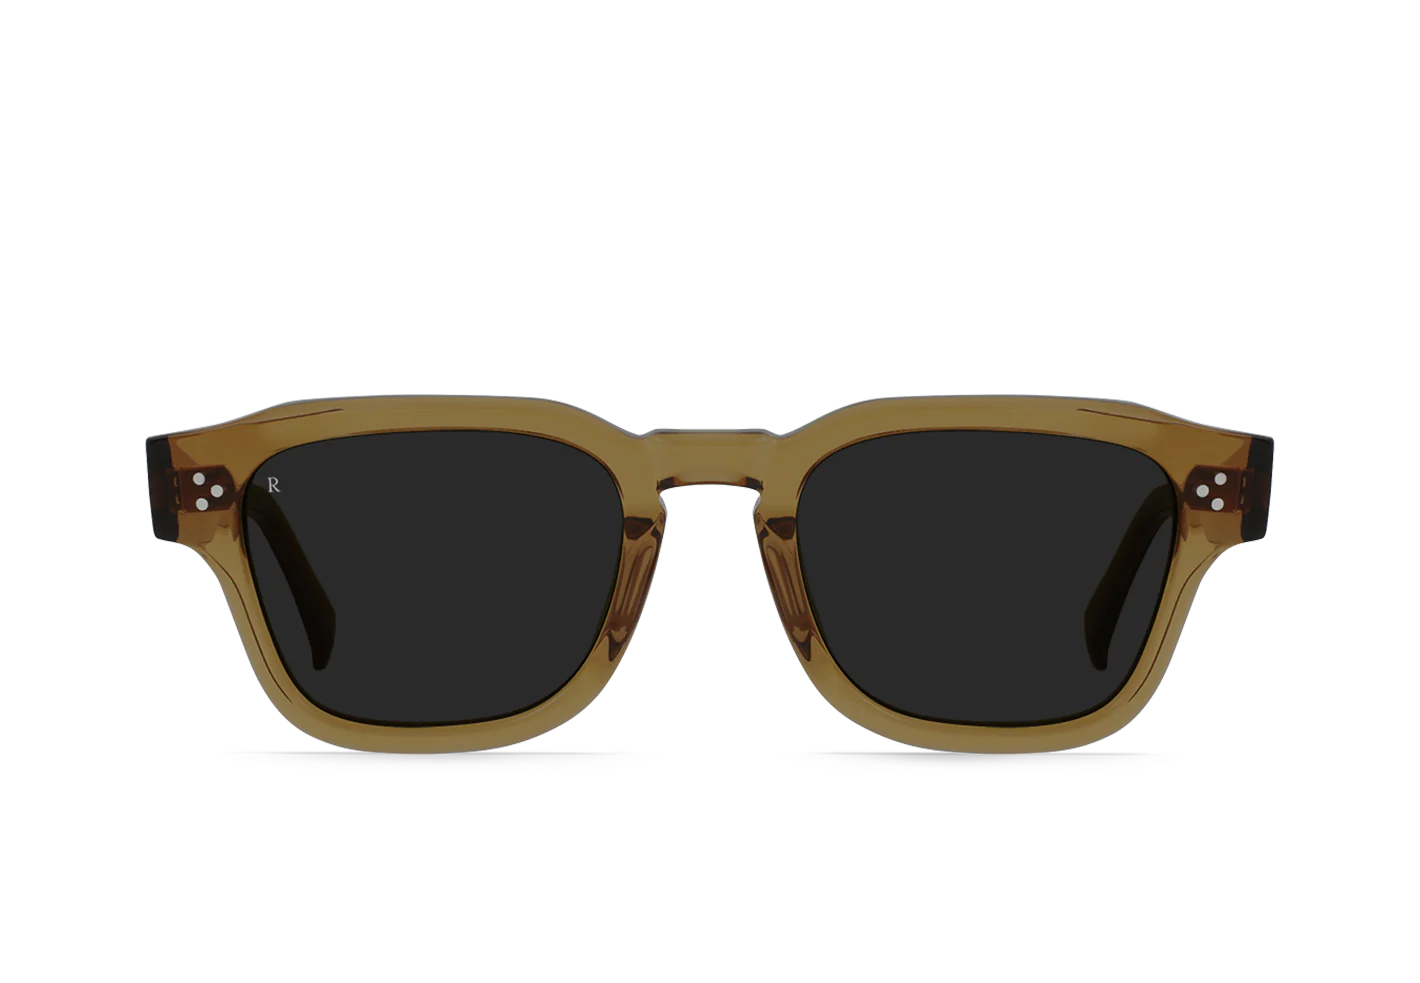 RAEN's Rece Men's Square Sunglasses with Clove frames and Shadow lenses